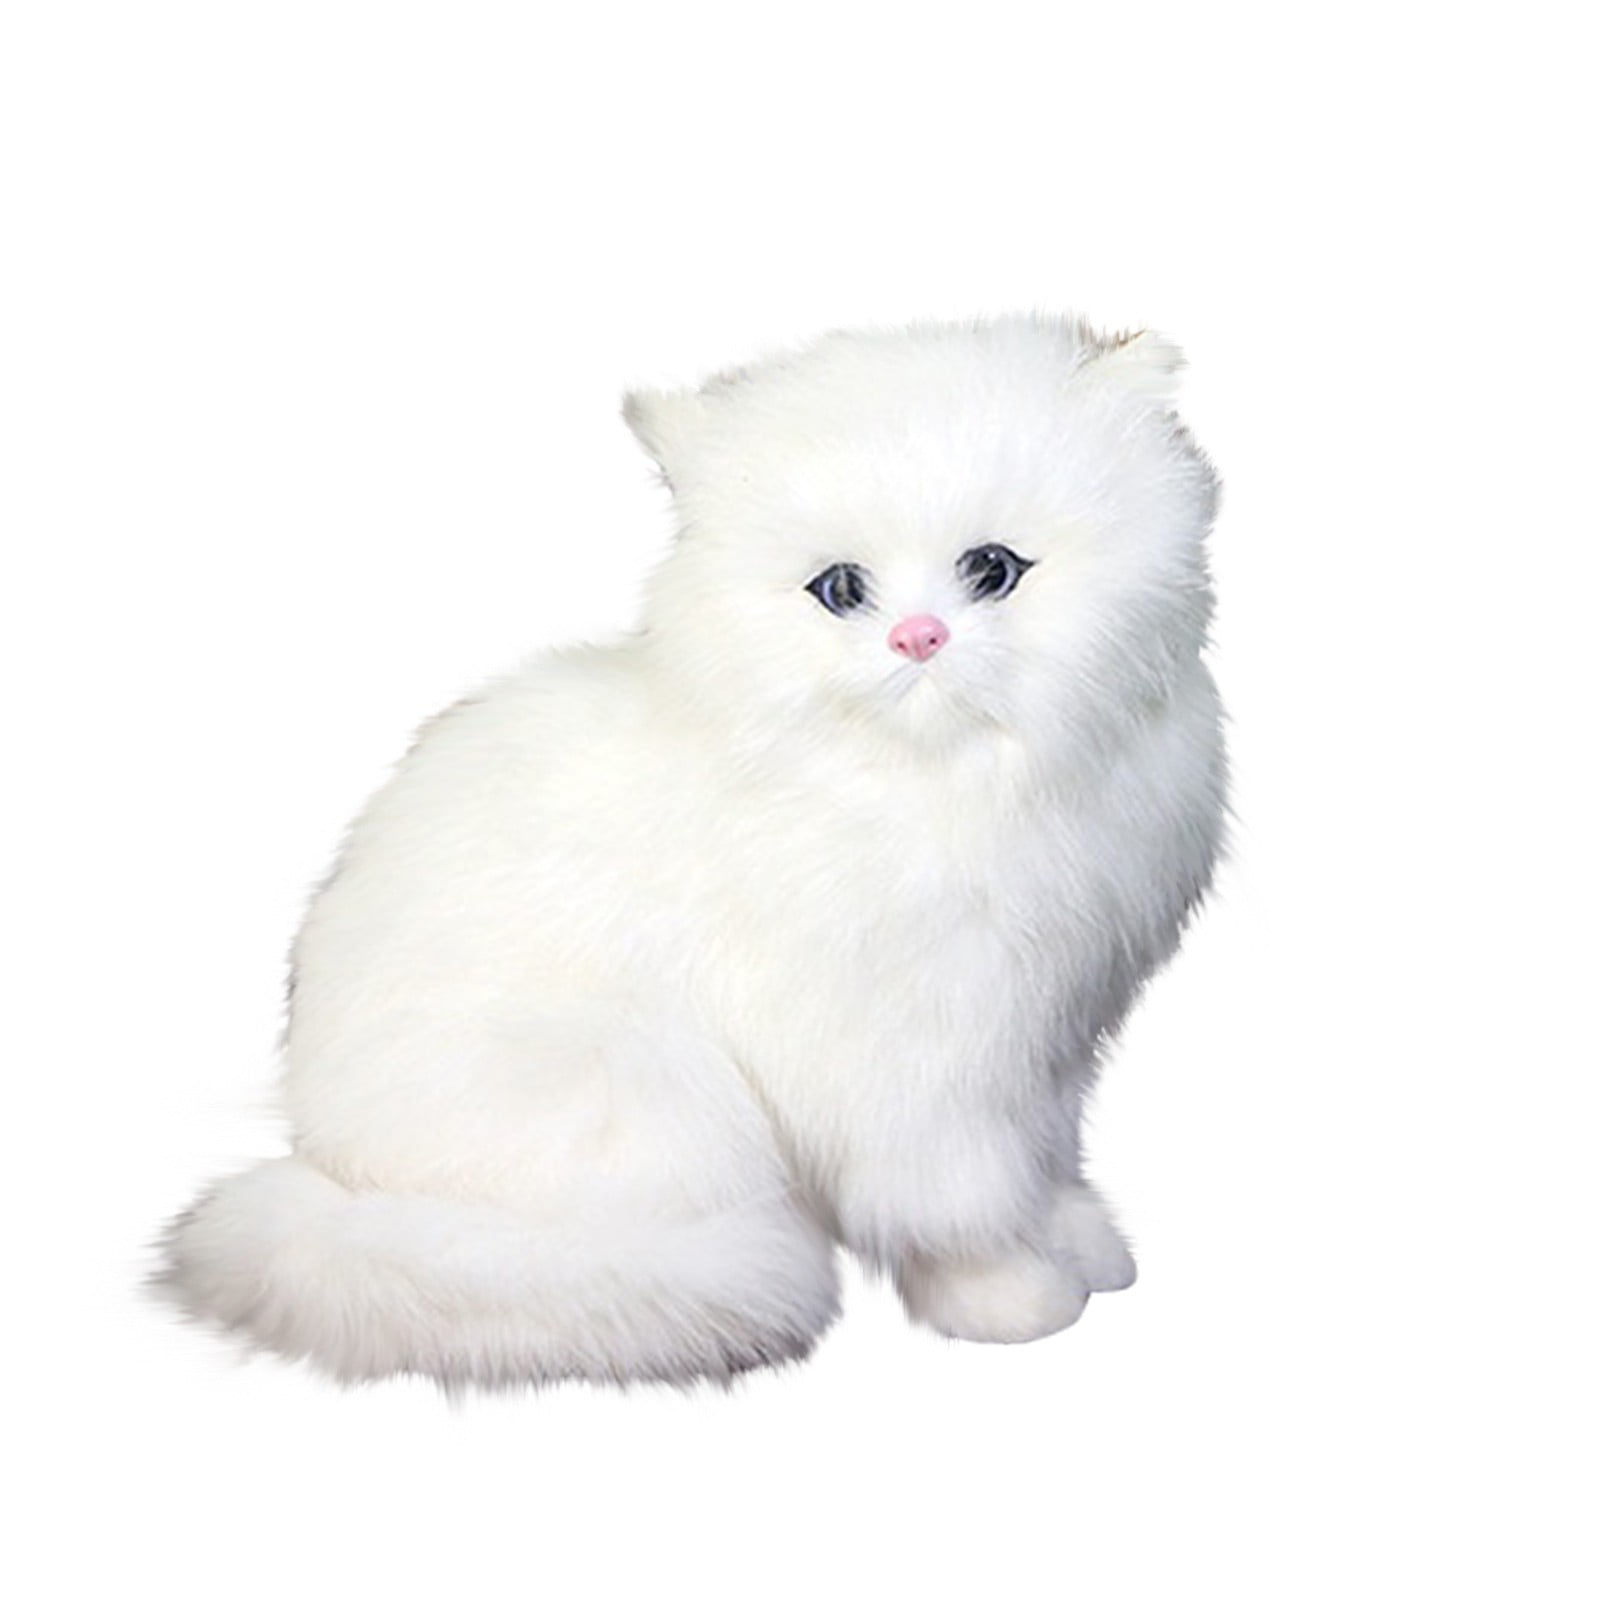 Funny Kitty Lifelike Cute Plush Cat Soft Doll Sound Toys Kids Gift Home Supplies 